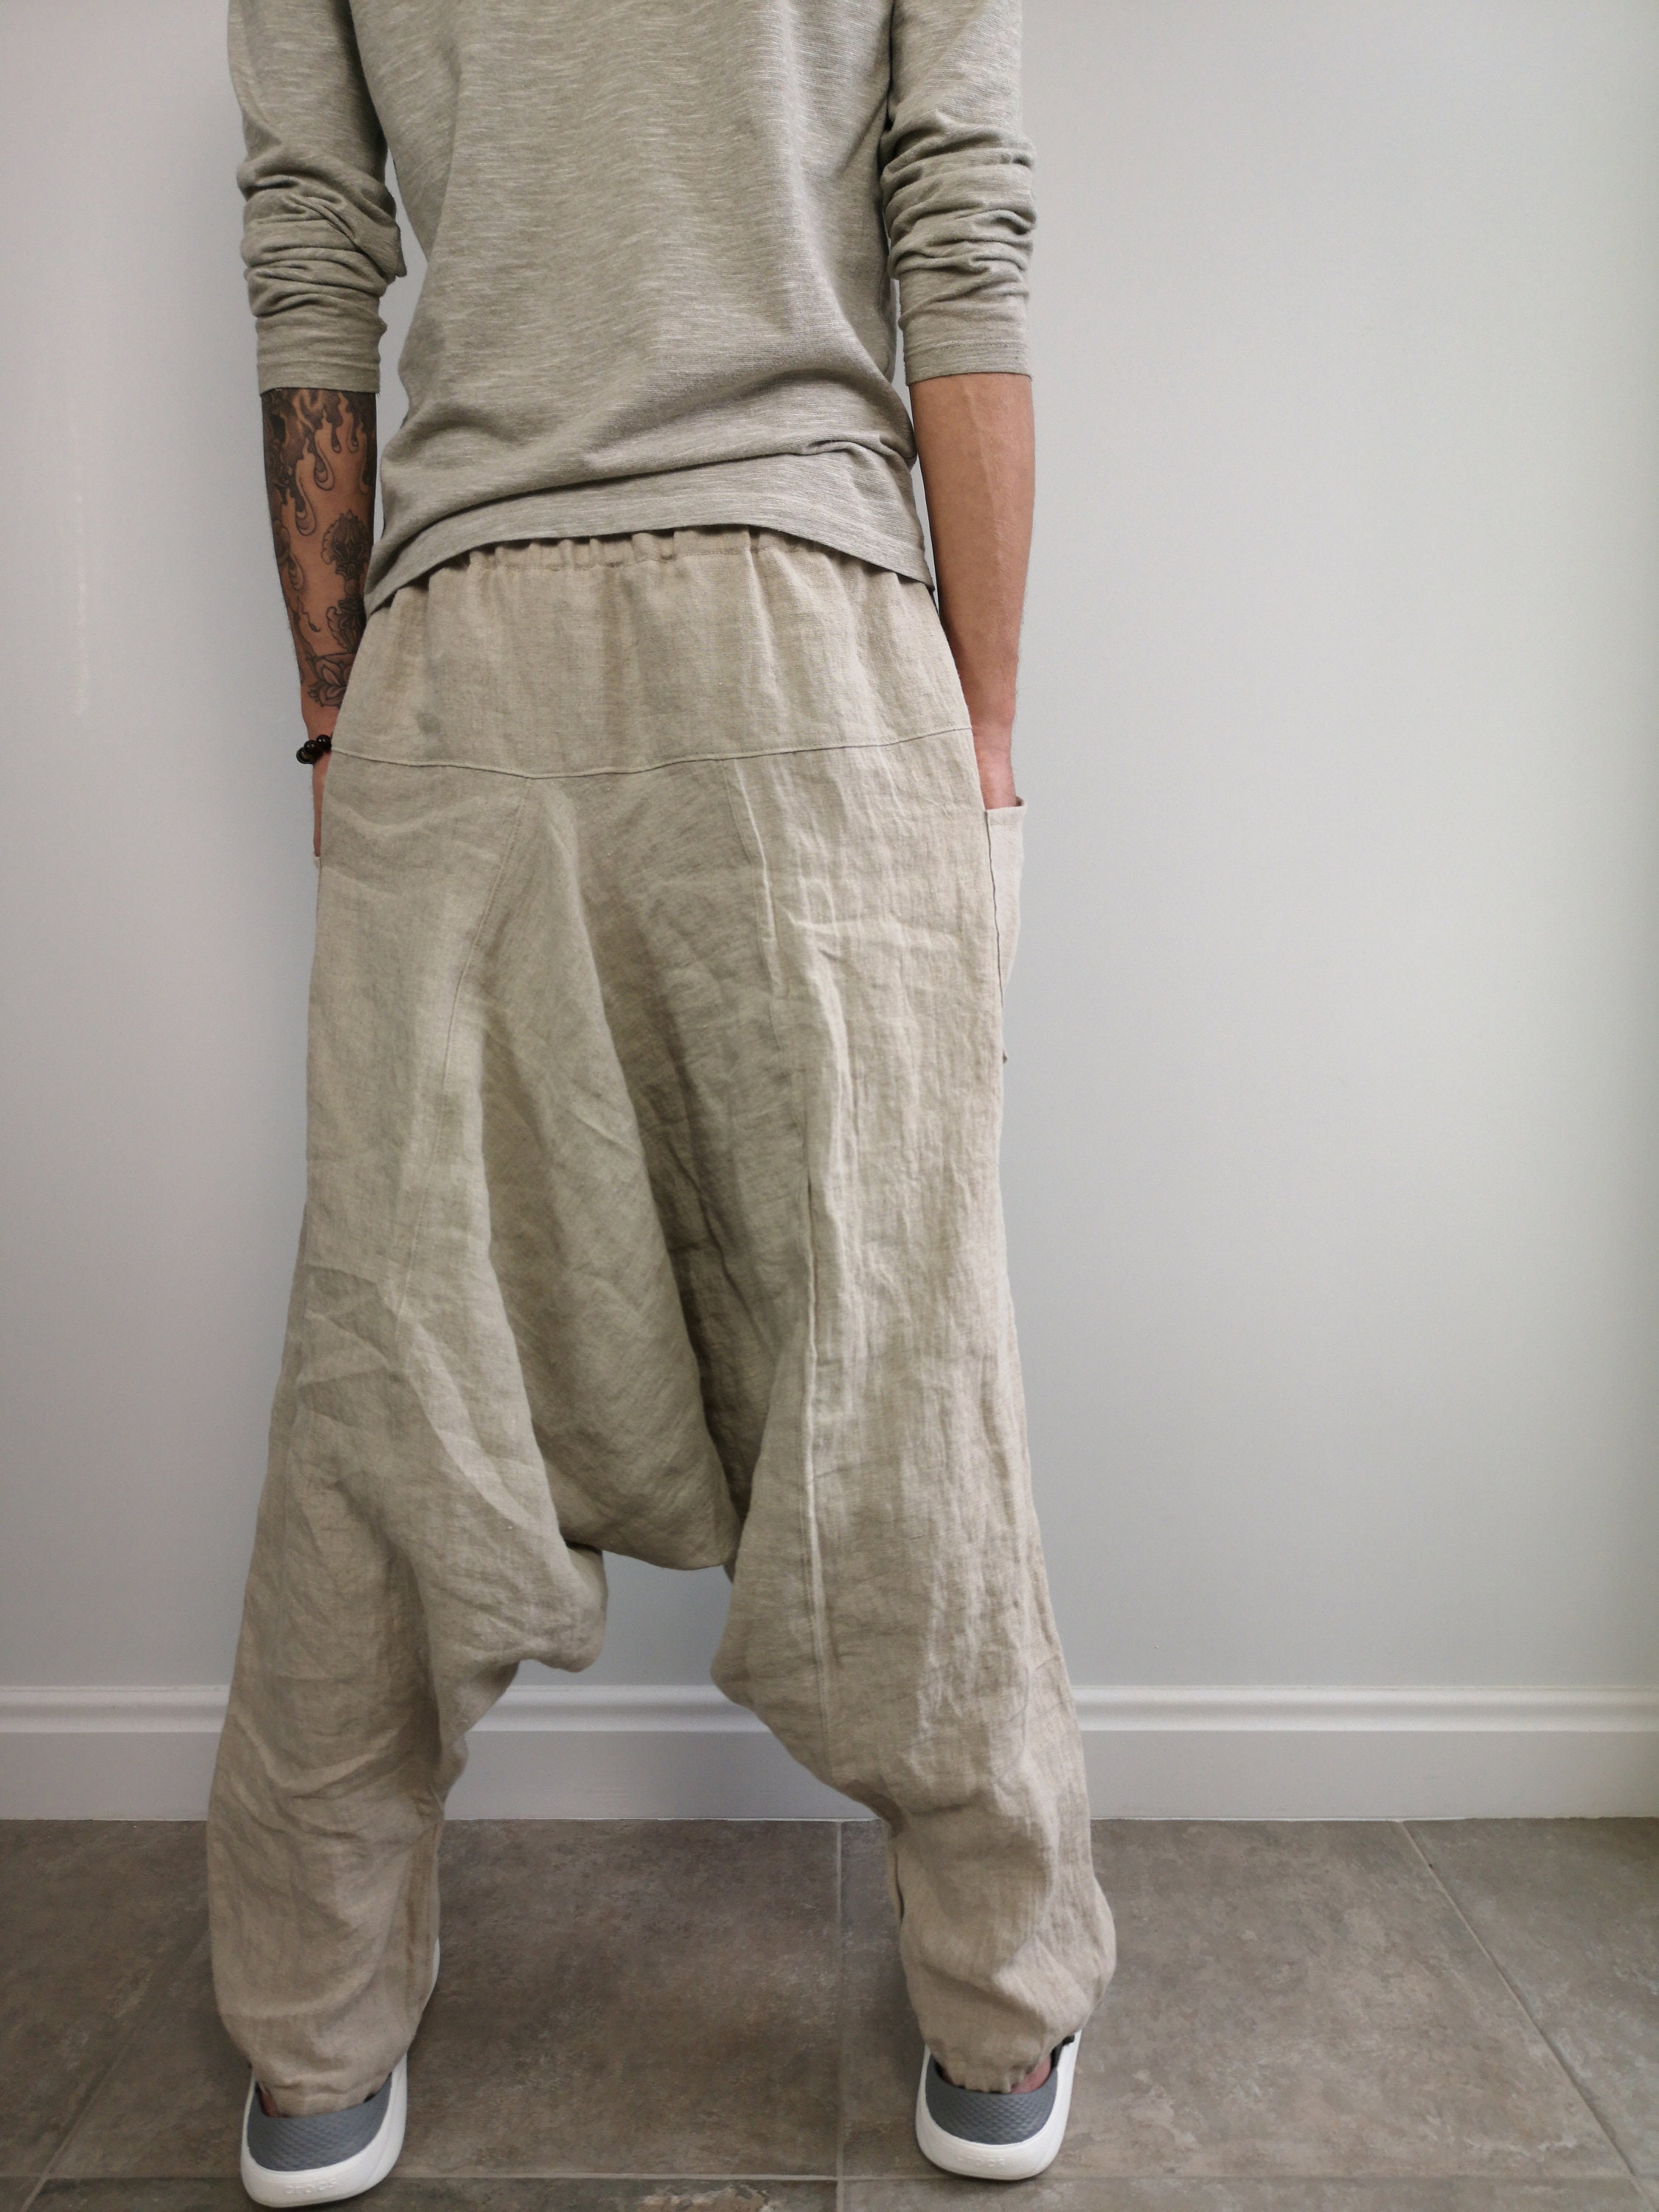 Undyed Natural Linen Unisex Harem Pants / Trousers Relaxed - Etsy